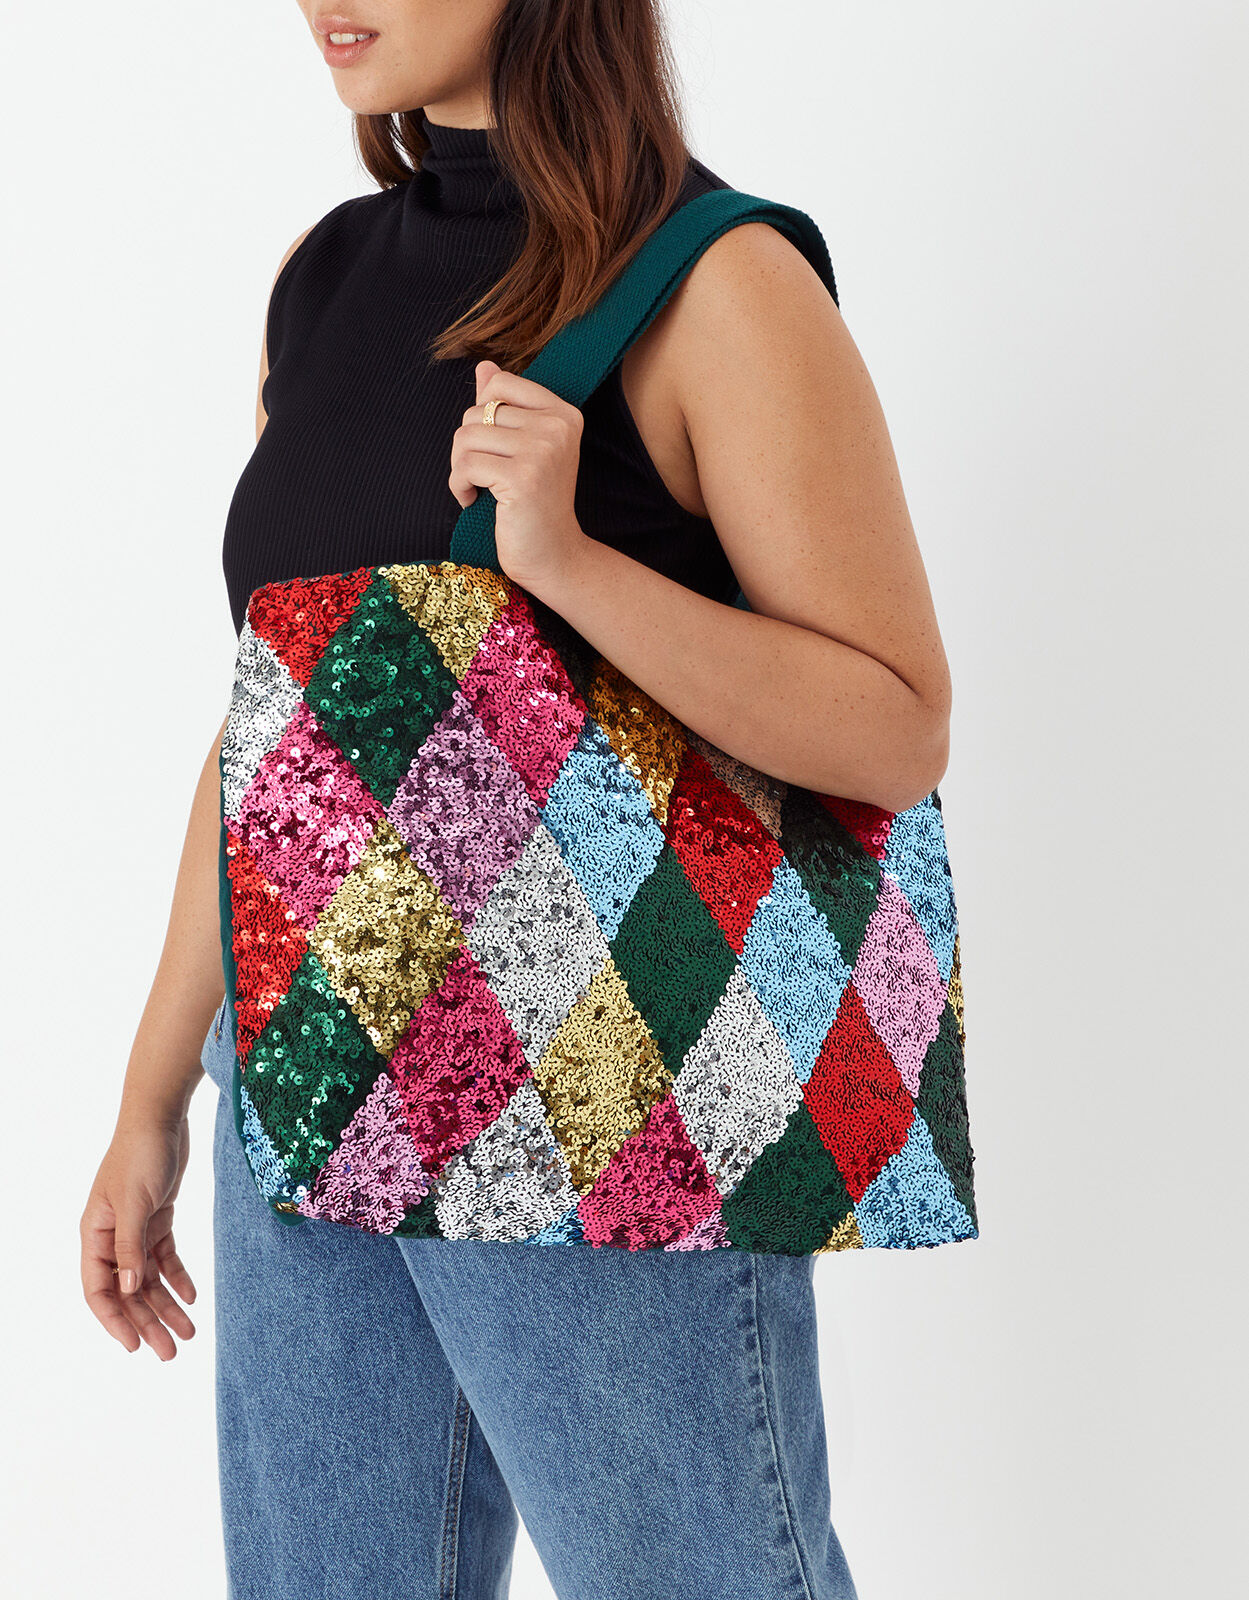 French Style Sequin Tote Bag: Stella – The Natural Tote Co.